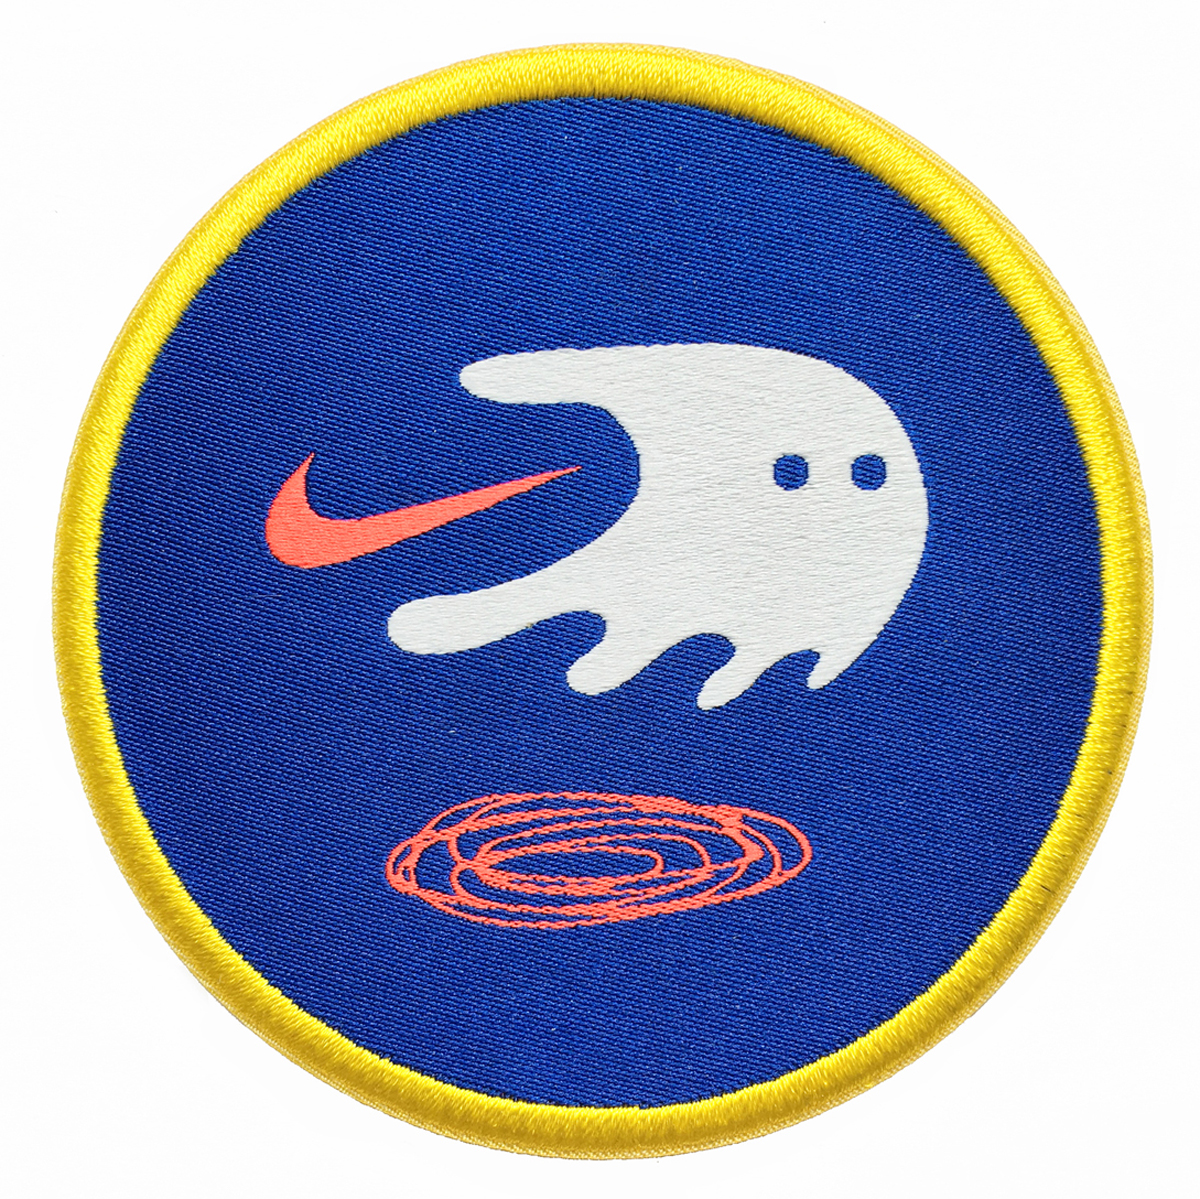 NIKE - 'Palais of Speed' Patches